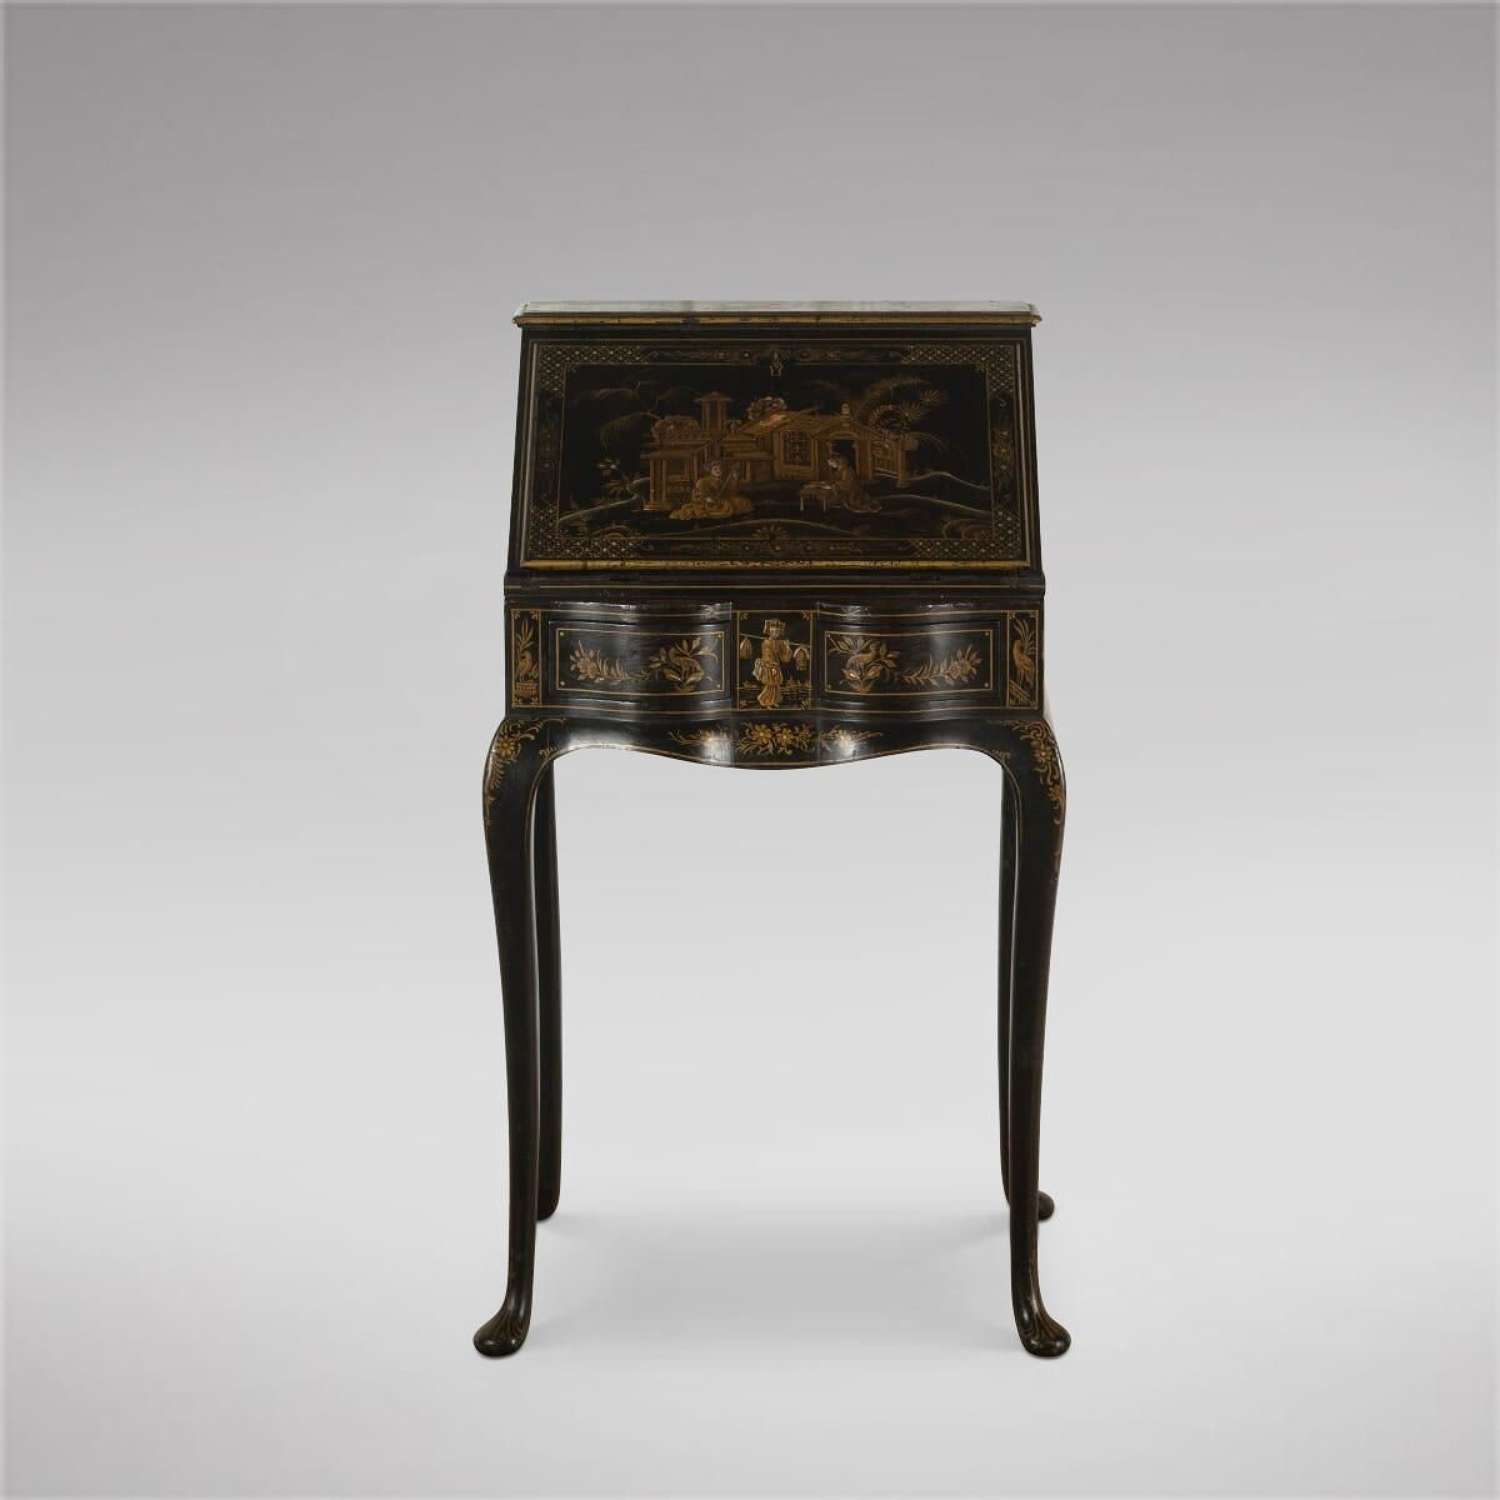 English Lacquered Giltwood Desk with Chinoserie Decoration